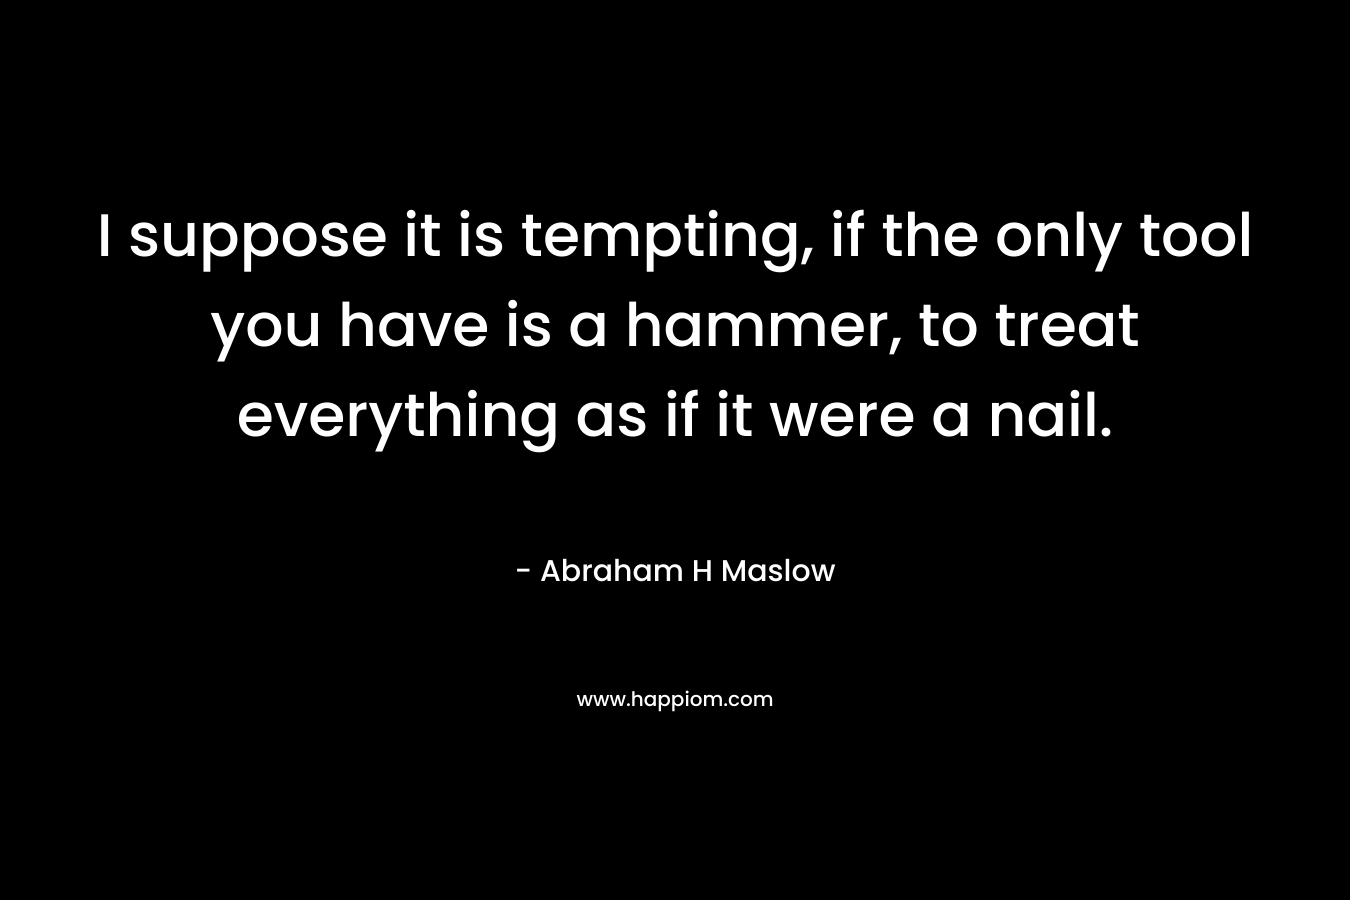 I suppose it is tempting, if the only tool you have is a hammer, to treat everything as if it were a nail. – Abraham H Maslow